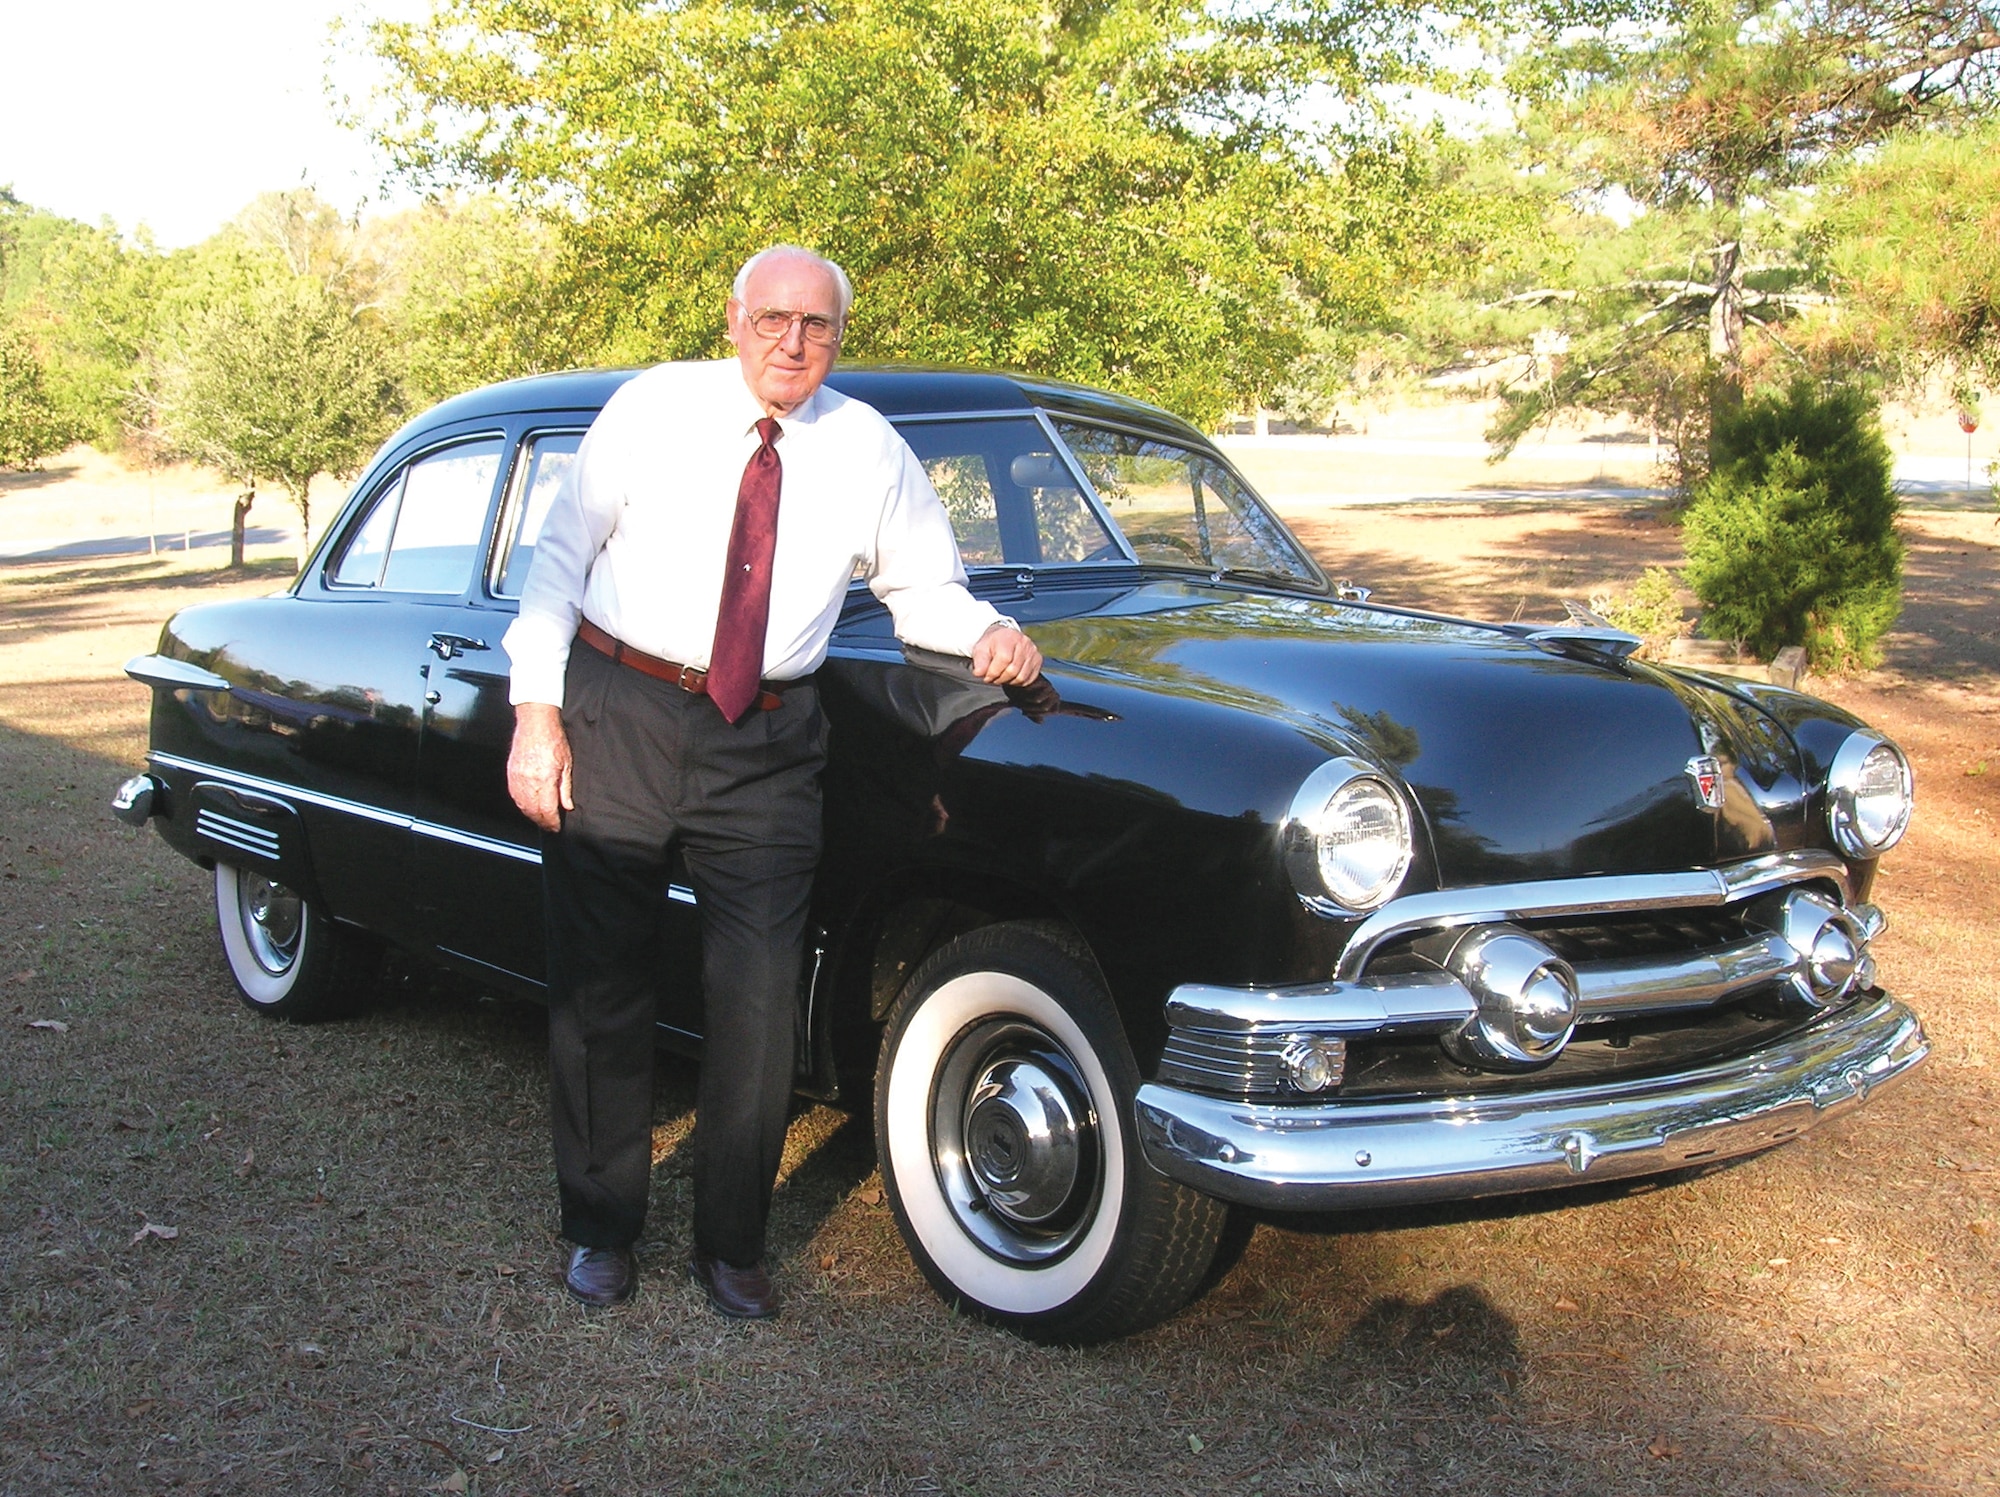 Howard Dixon stands in front of his recently restored 1951 Ford Custom Deluxe Tudor Coupe that he drove when he enlisted in the Air Force in 1952. Dixon served his country in the military and civil service for 55 years. Courtesy photo by Barbara Slay       